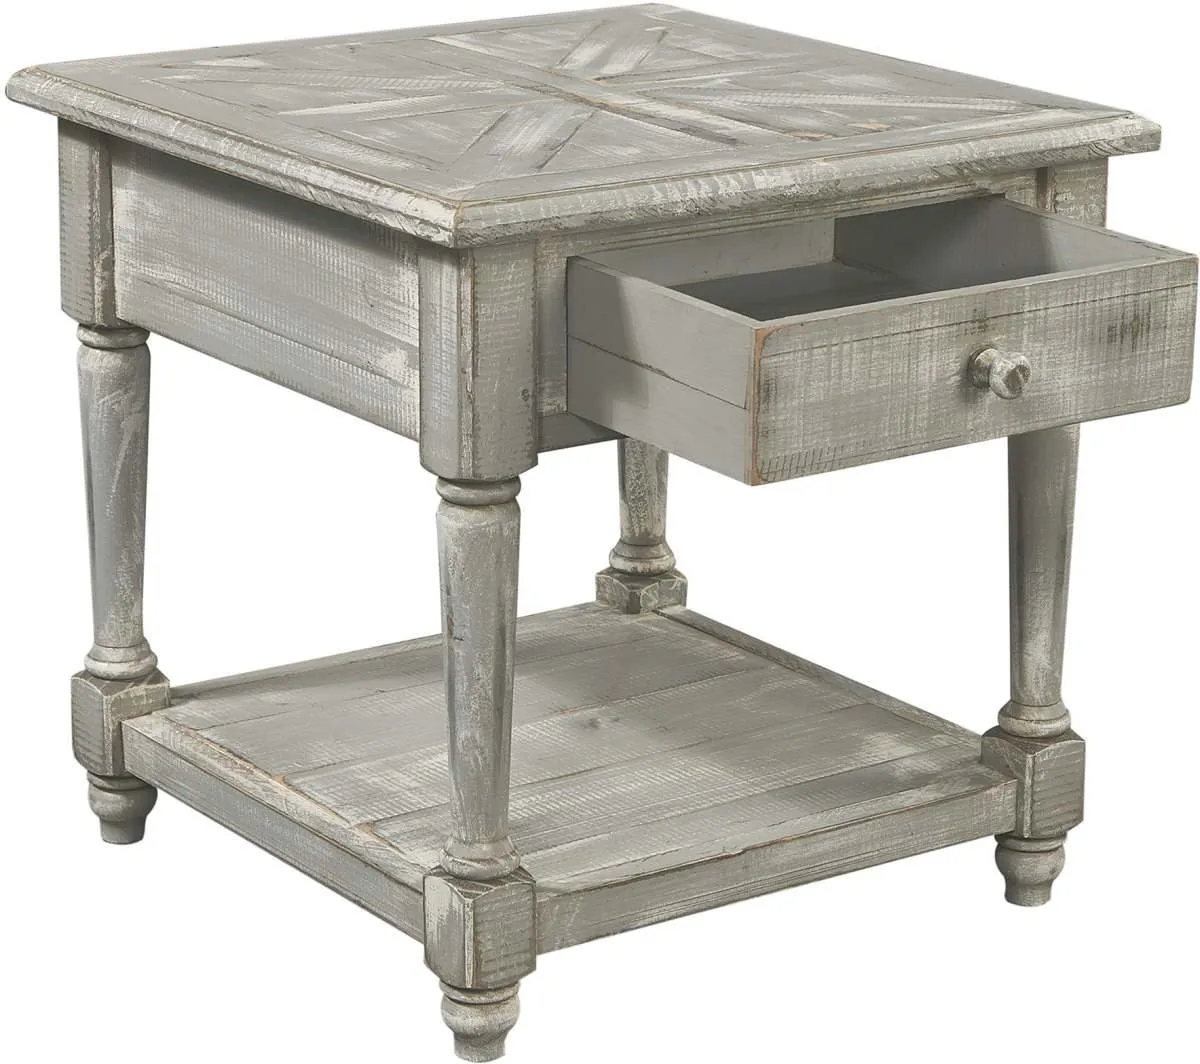 HINSDALE GREYWOOD SQUARE END TABLE